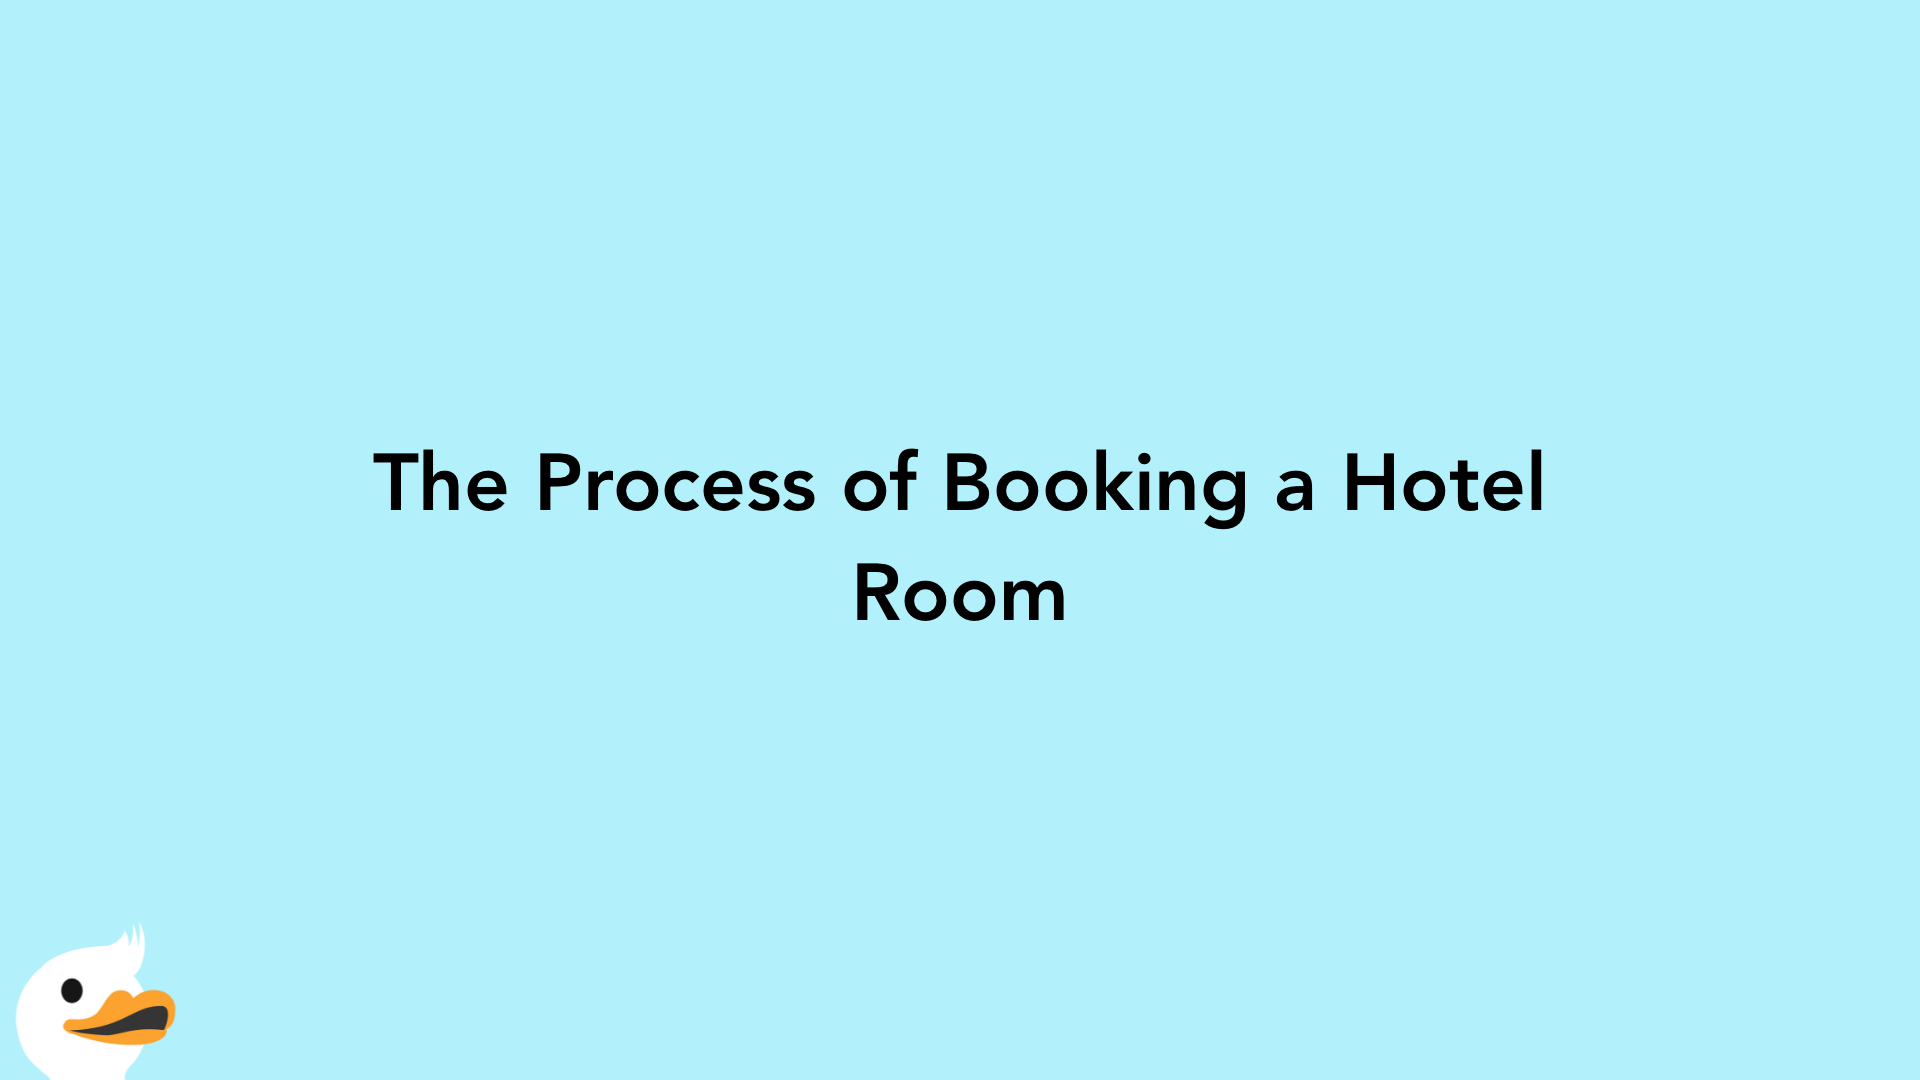 The Process of Booking a Hotel Room